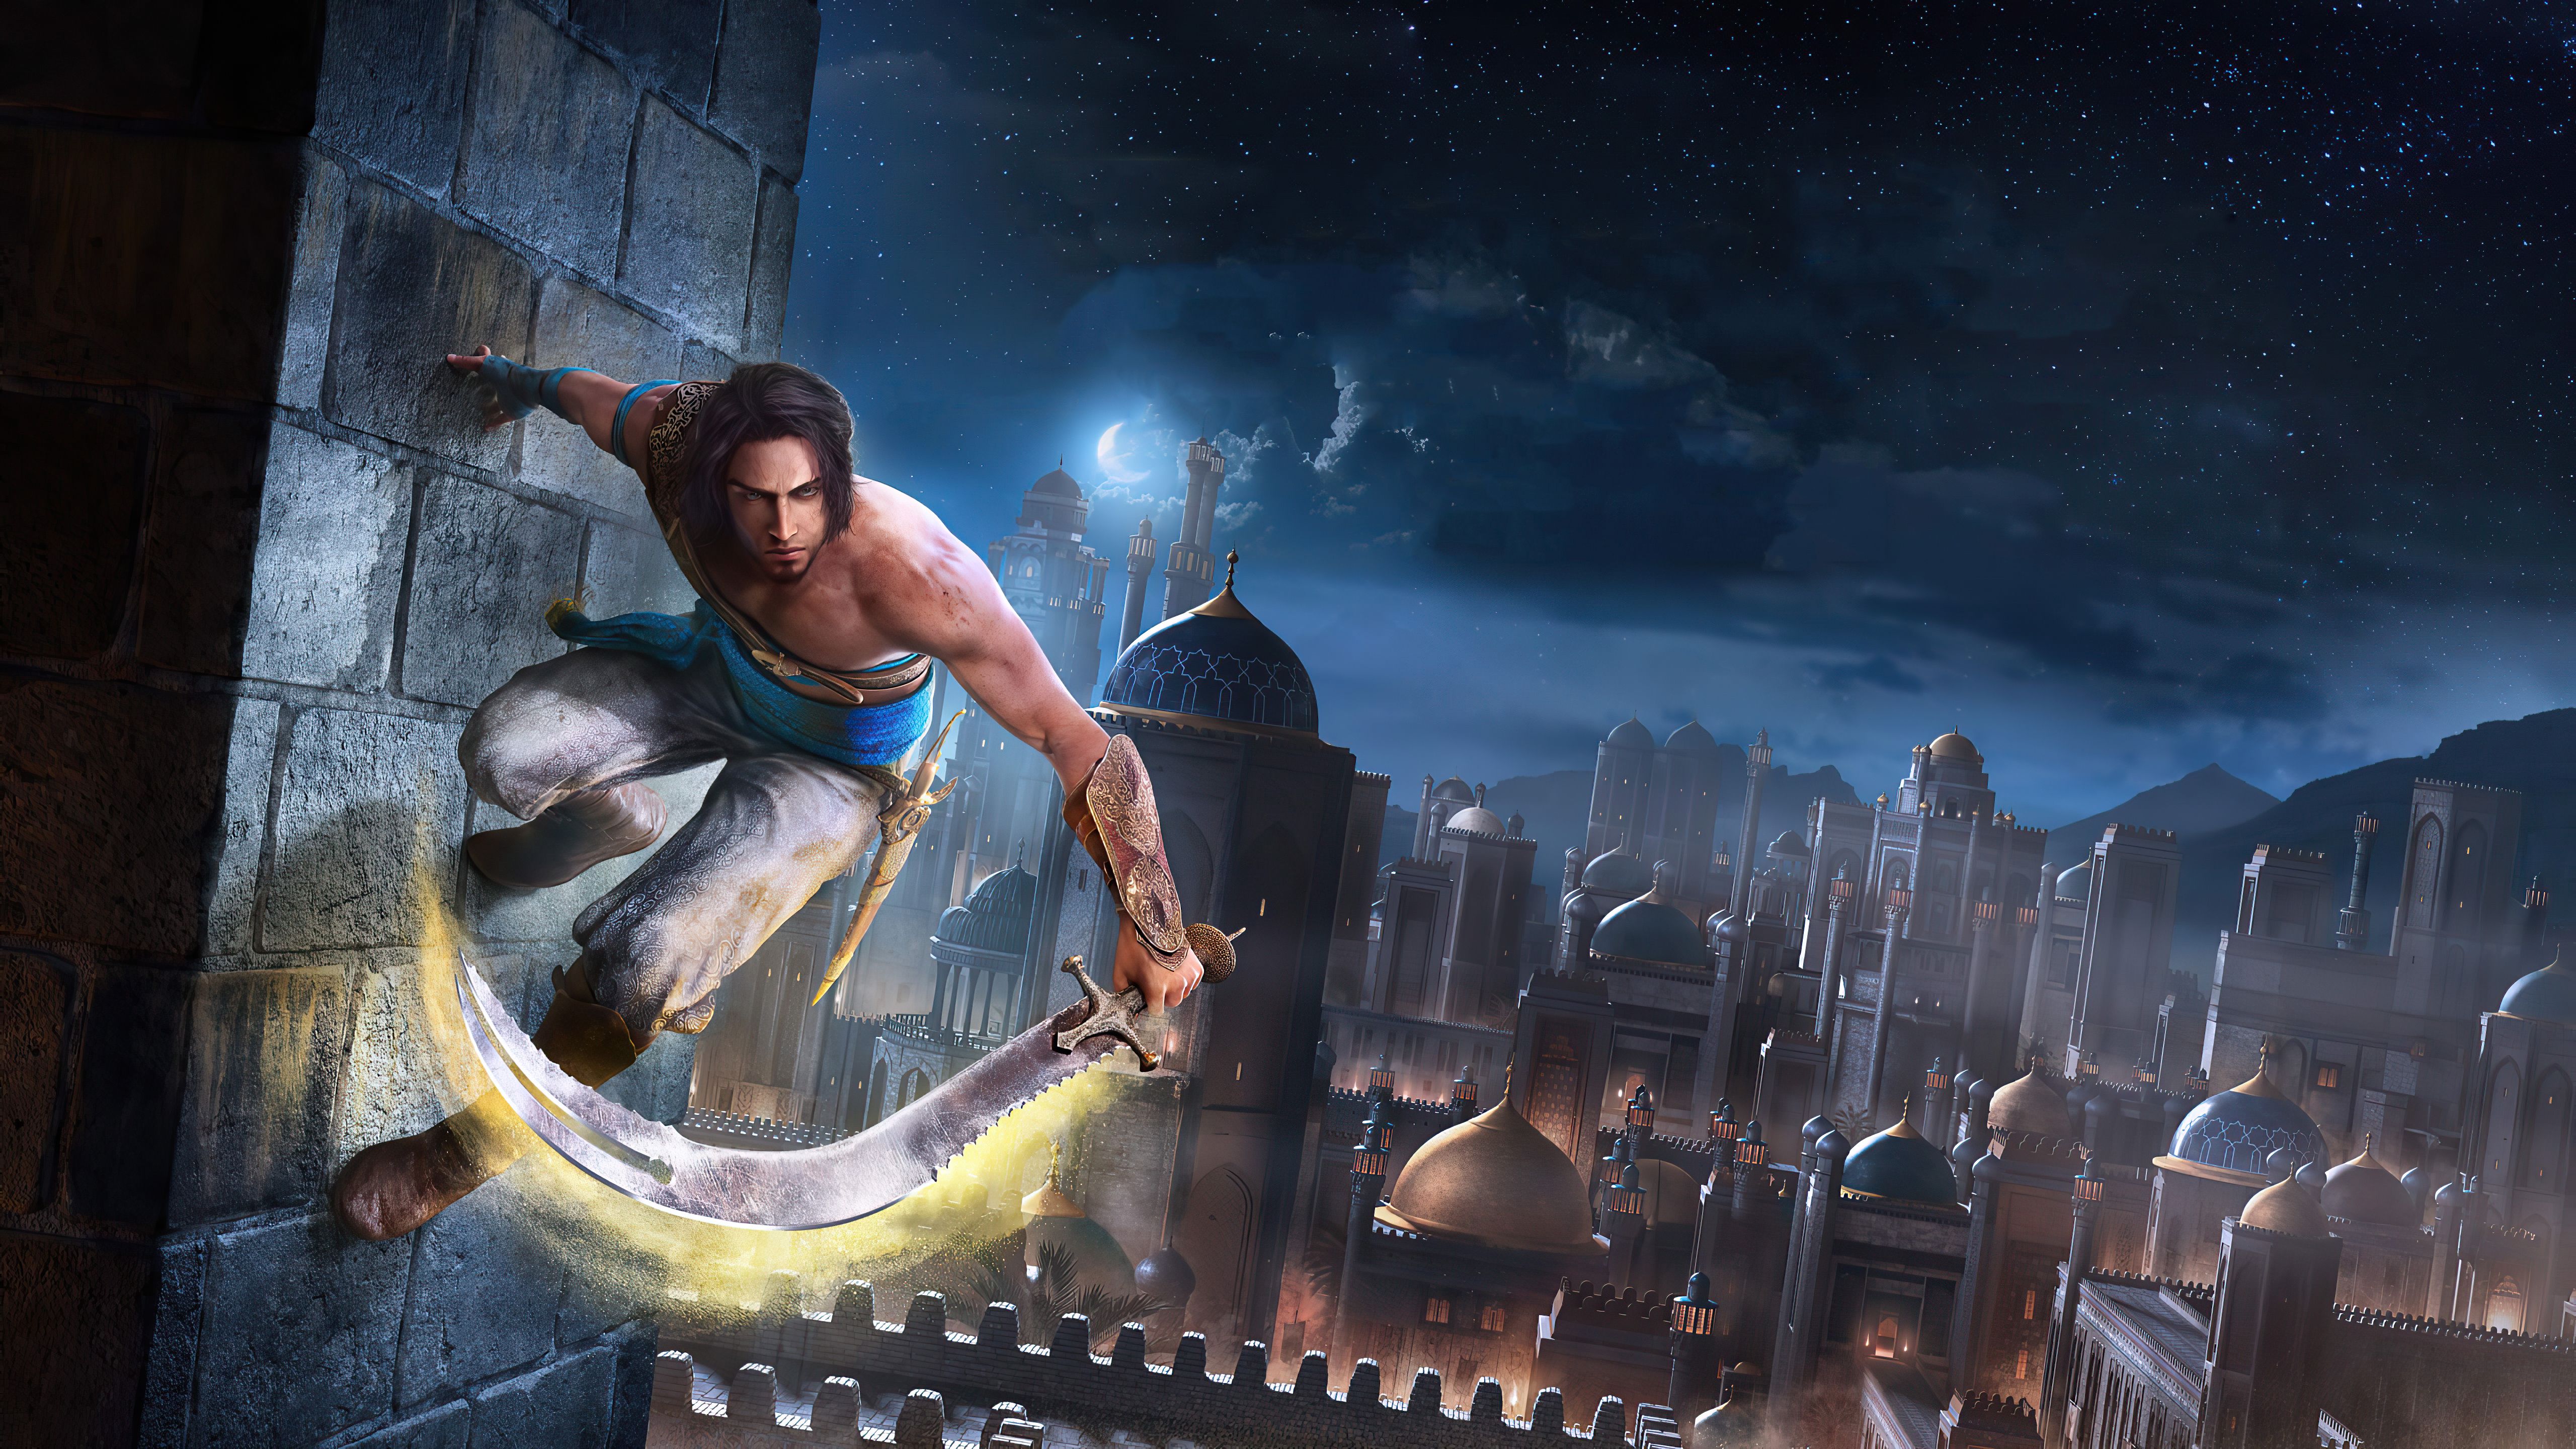 Prince Of Persia The Sands Of Time Remake HD Games, 4k Wallpaper, Image, Background, Photo and Picture